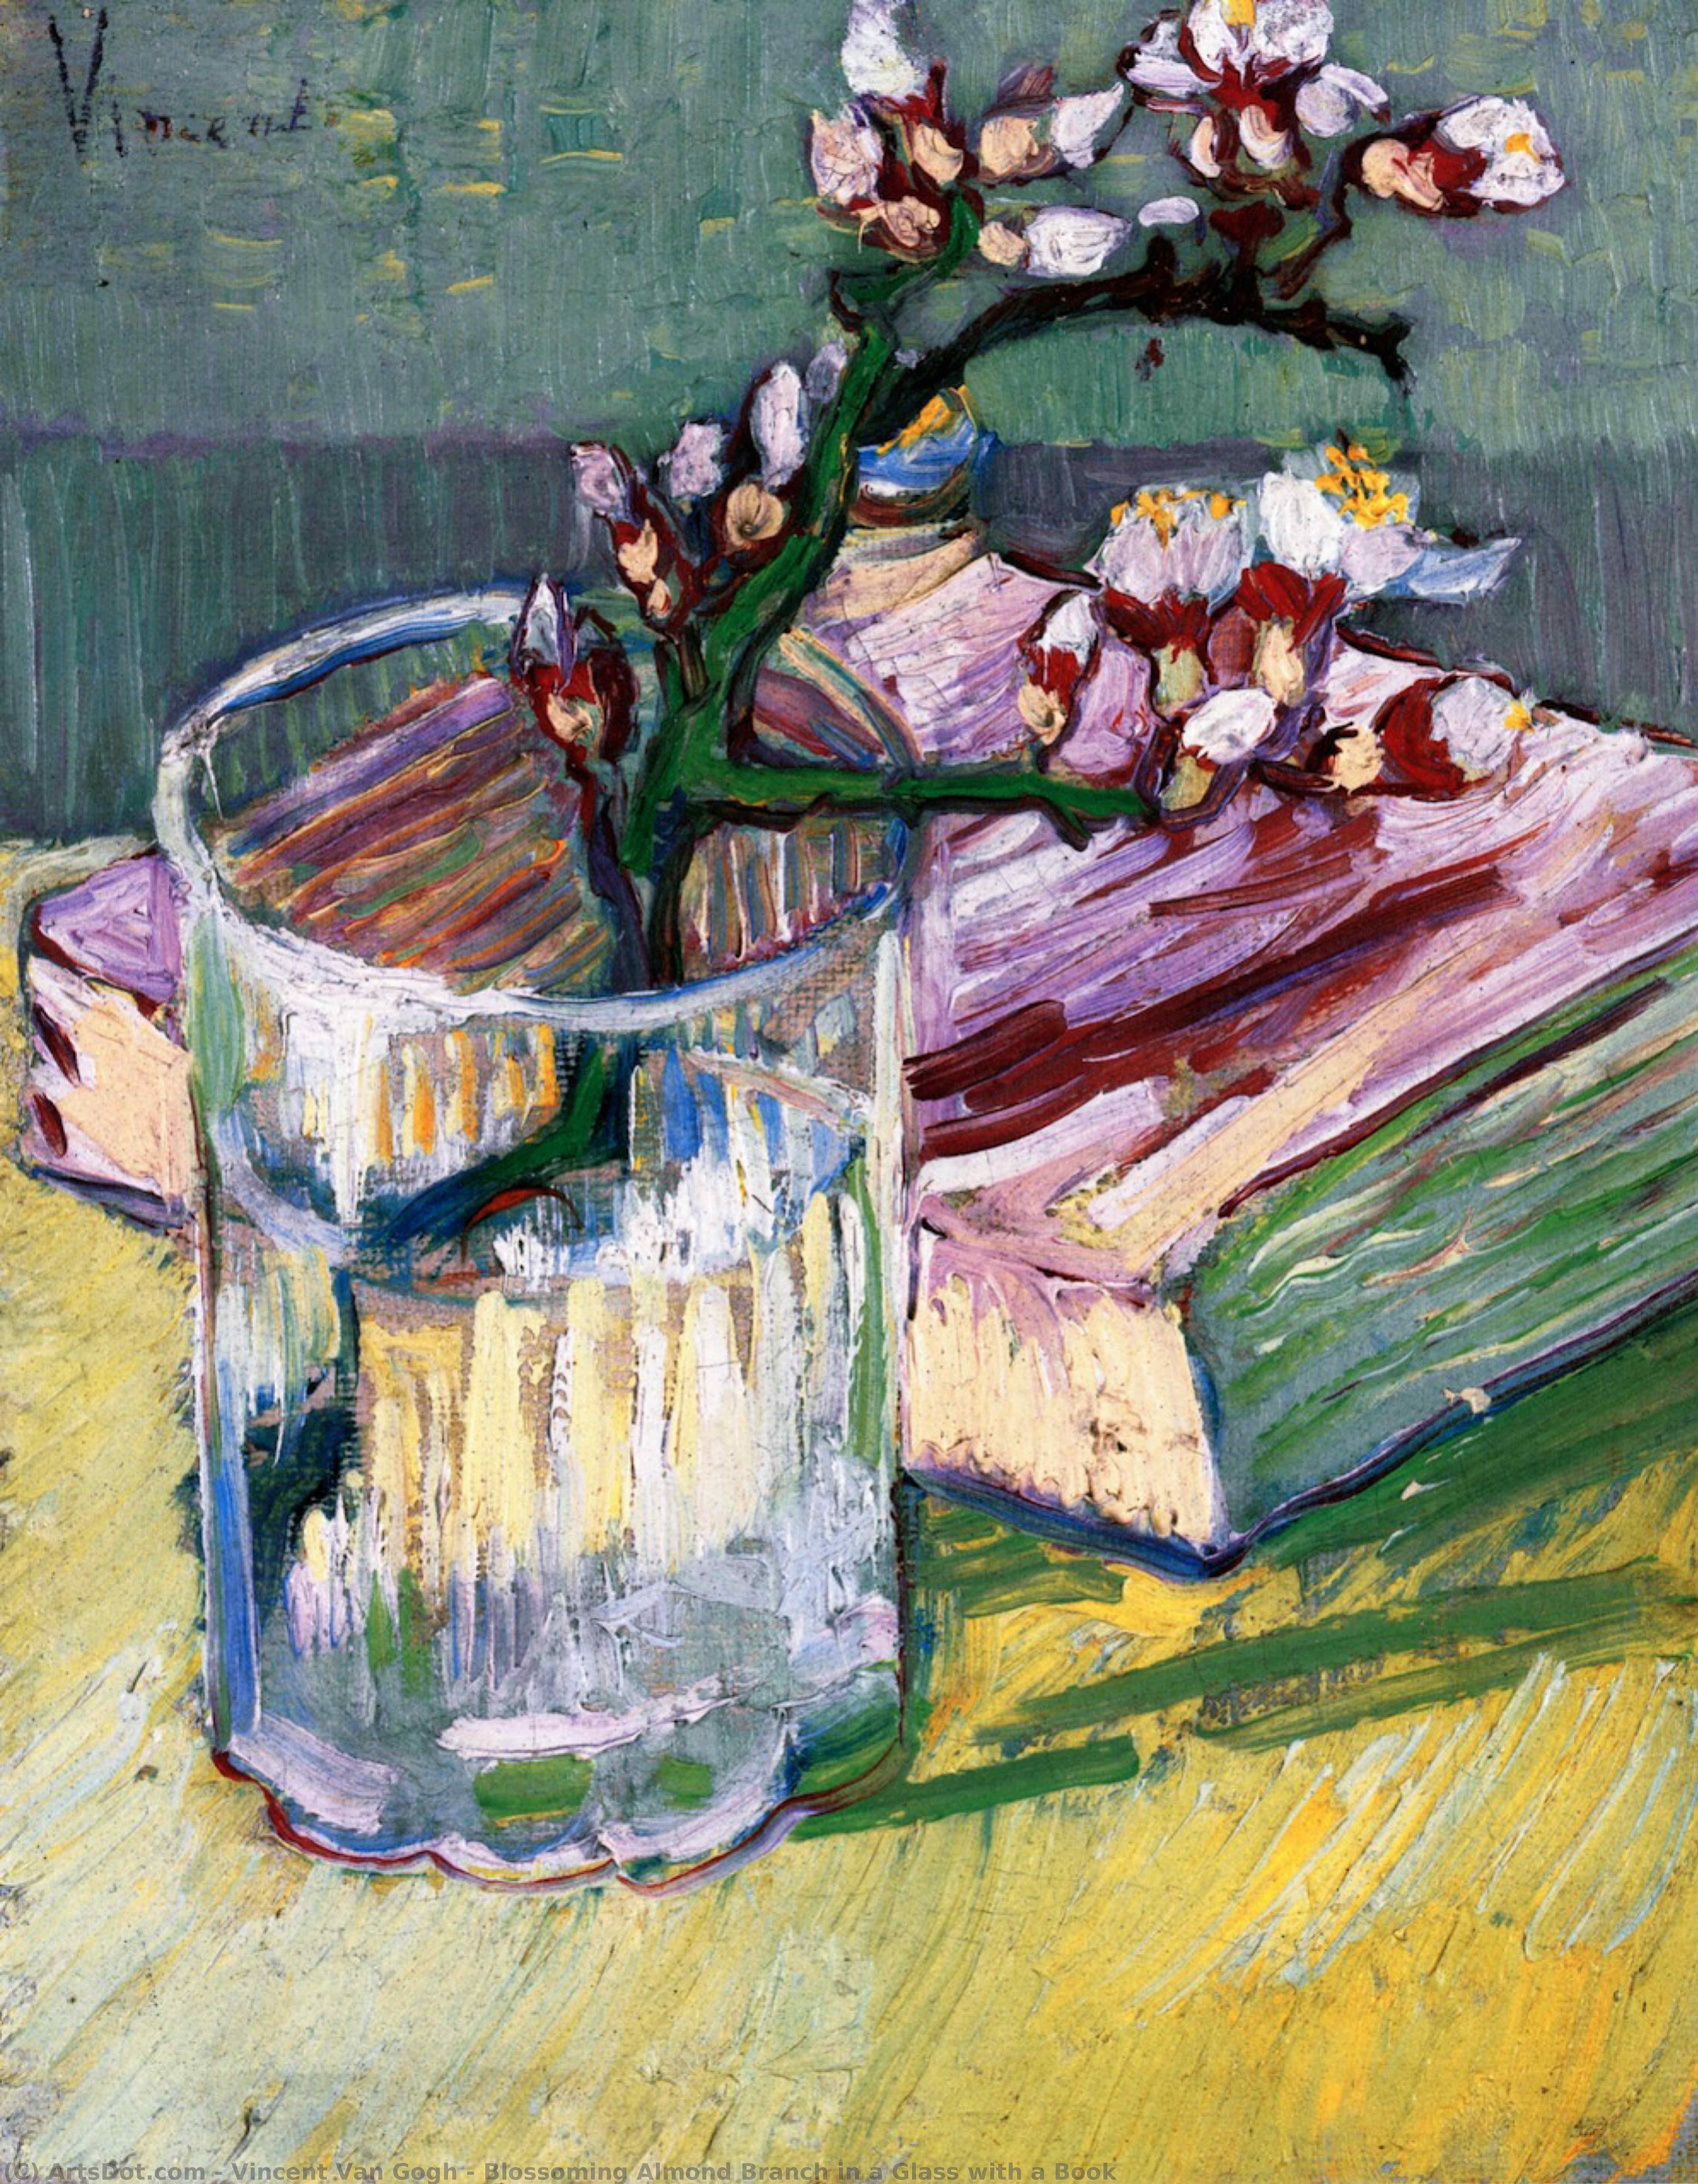 WikiOO.org - Encyclopedia of Fine Arts - Malba, Artwork Vincent Van Gogh - Blossoming Almond Branch in a Glass with a Book